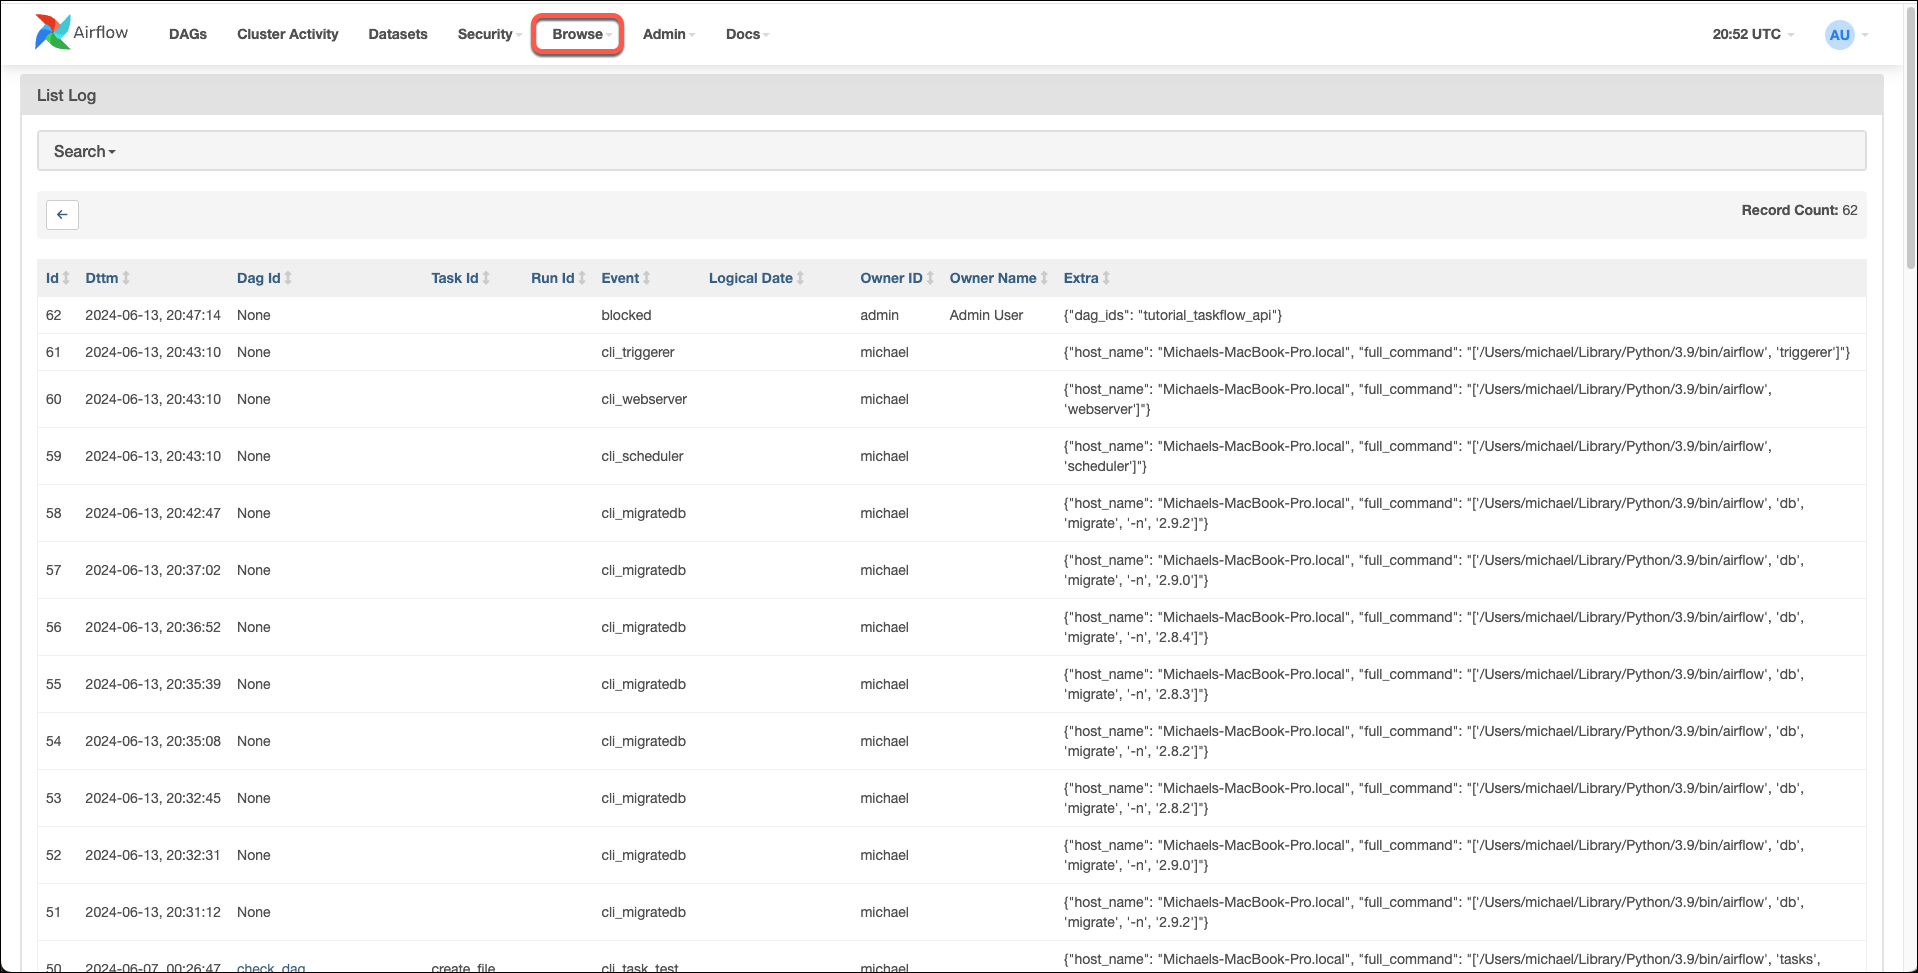 Audit Logs List View in the Airflow UI